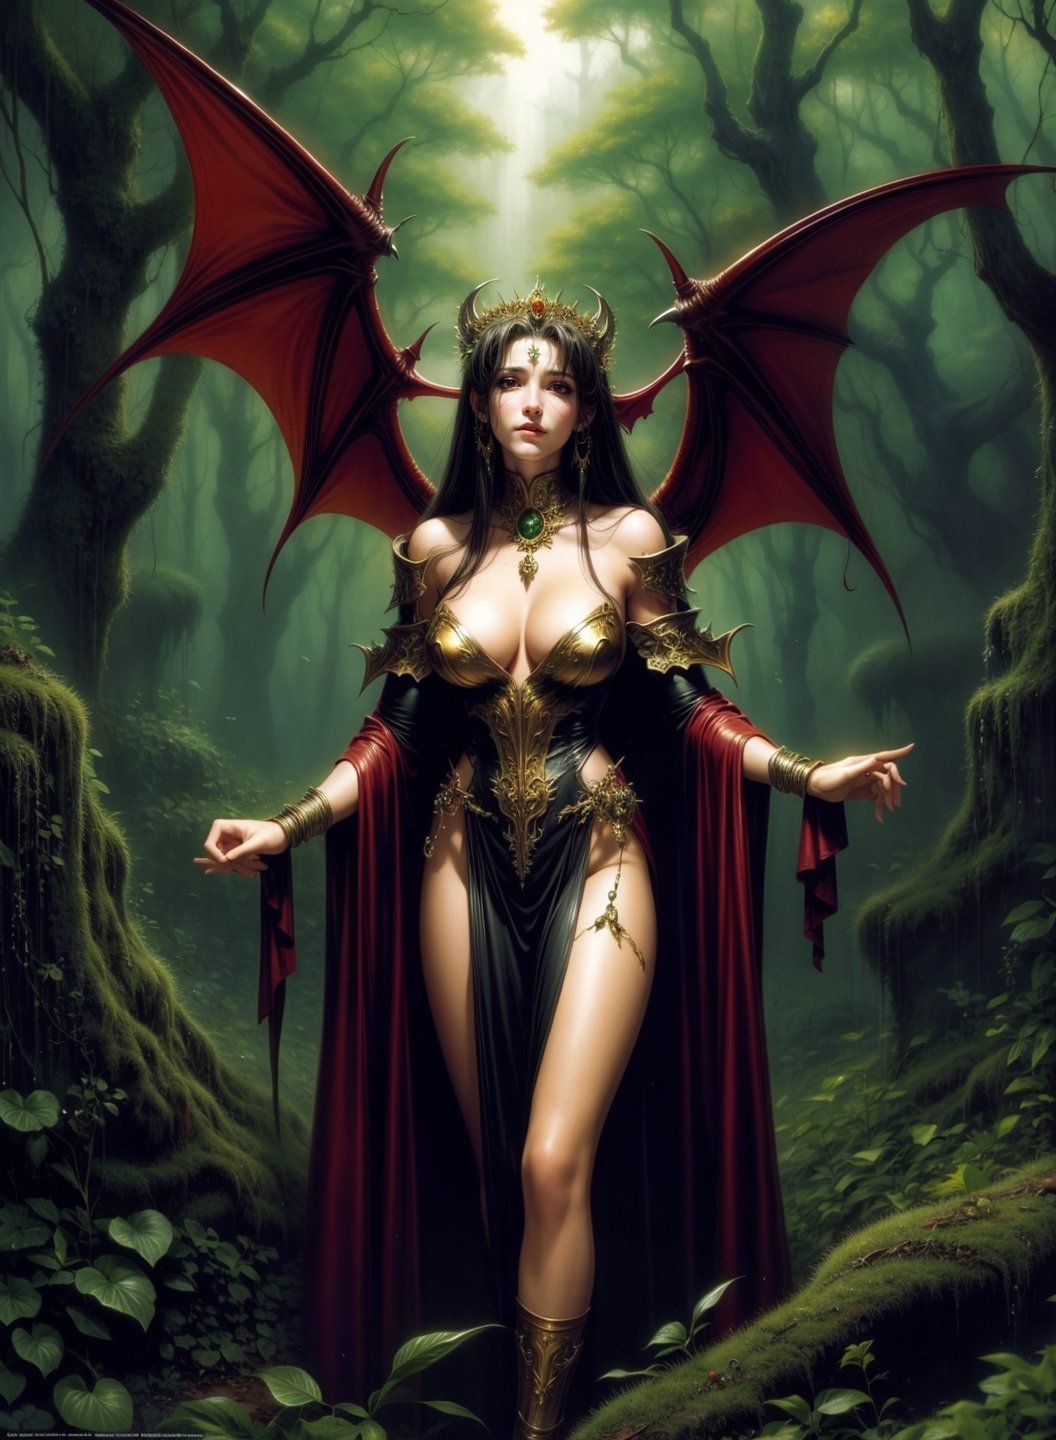 A large winged vampire queen by Luis Royo, richly golden jeweled, greenery forest background